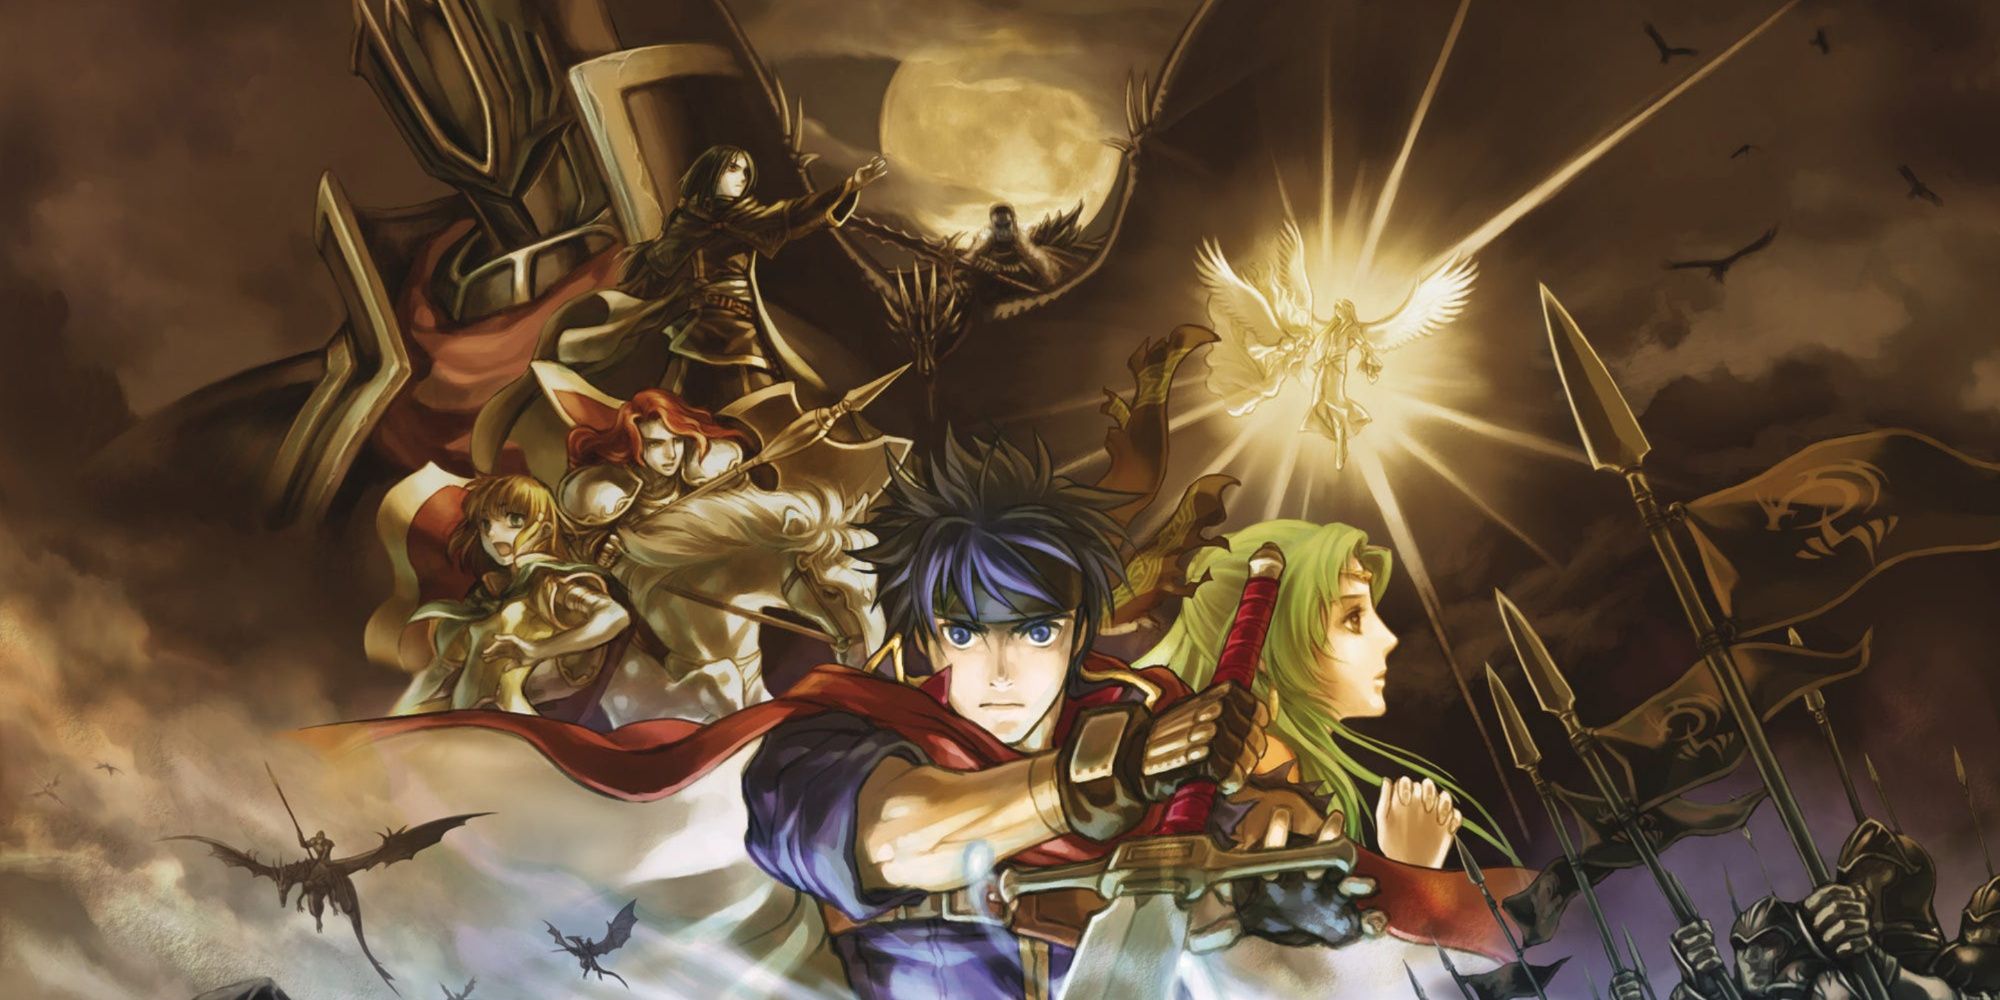 Promo art featuring characters in Fire Emblem Path Of Radiance